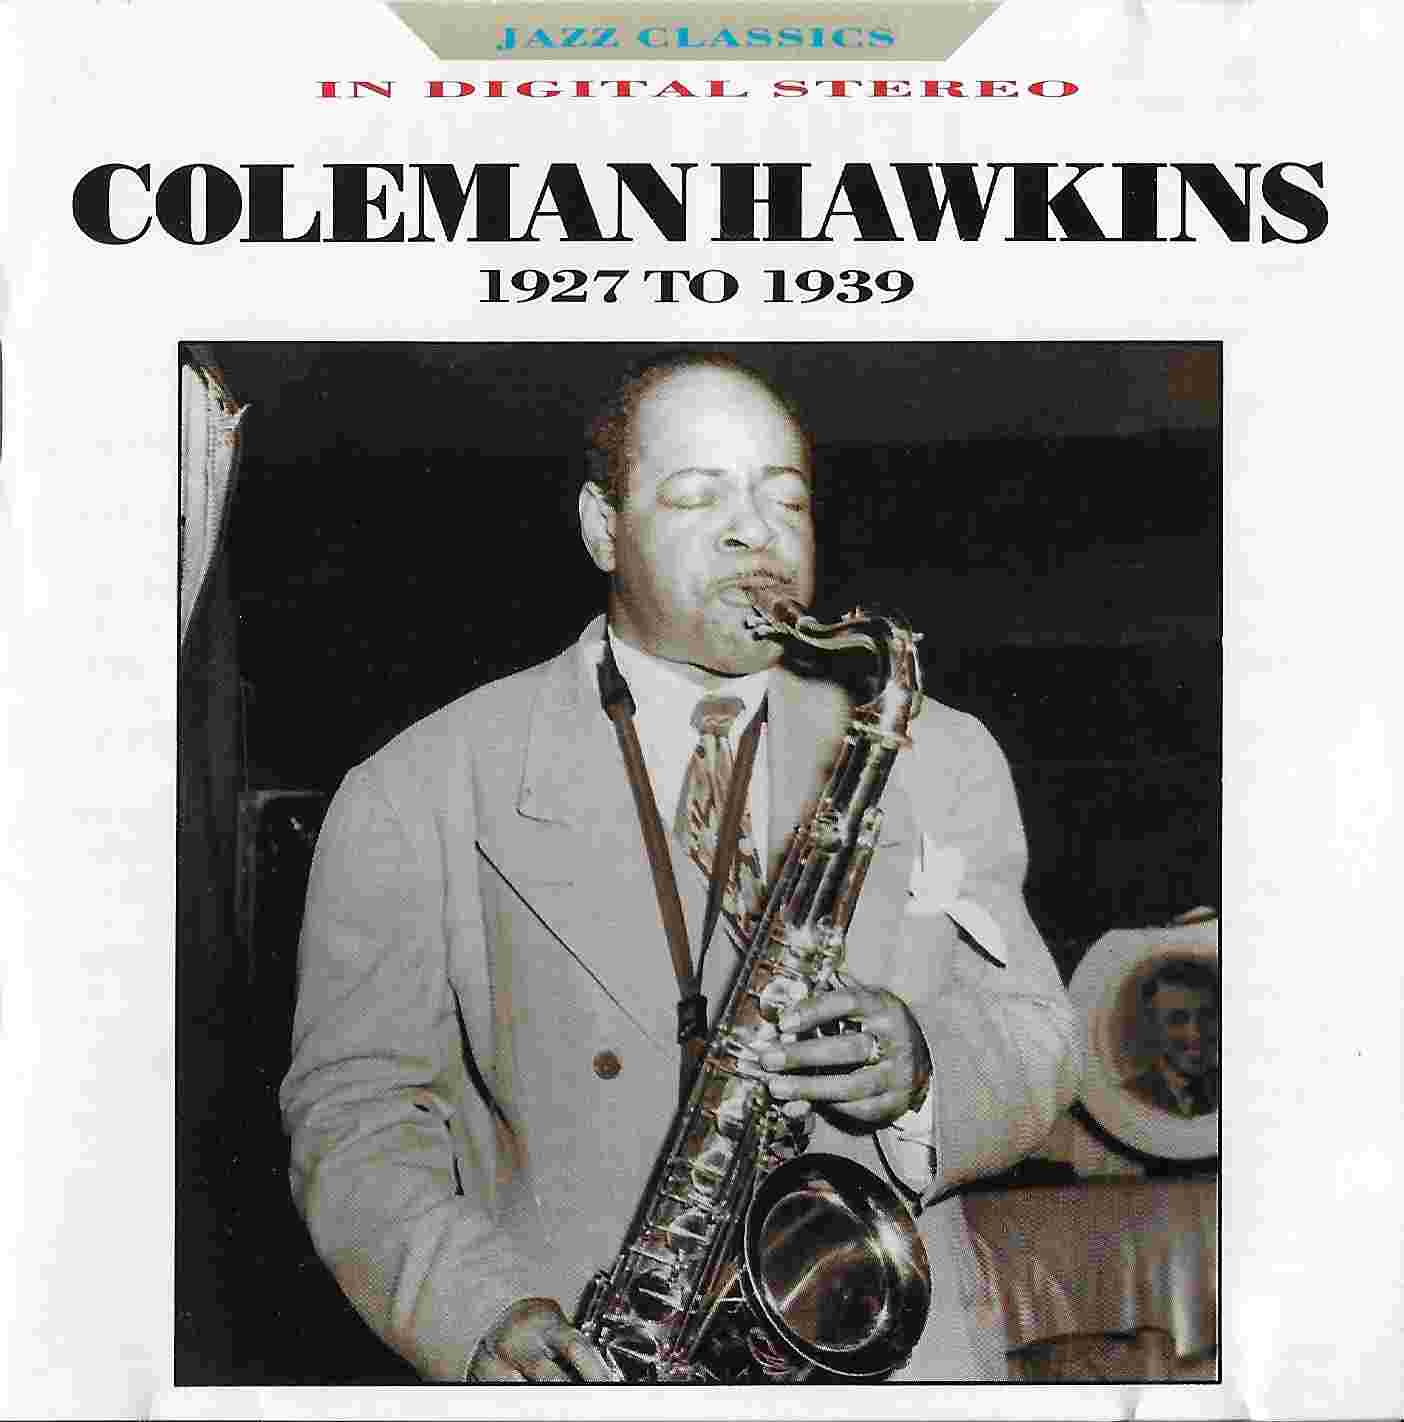 Picture of Jazz classics - Coleman Hawkins by artist Coleman Hawkins from the BBC cds - Records and Tapes library